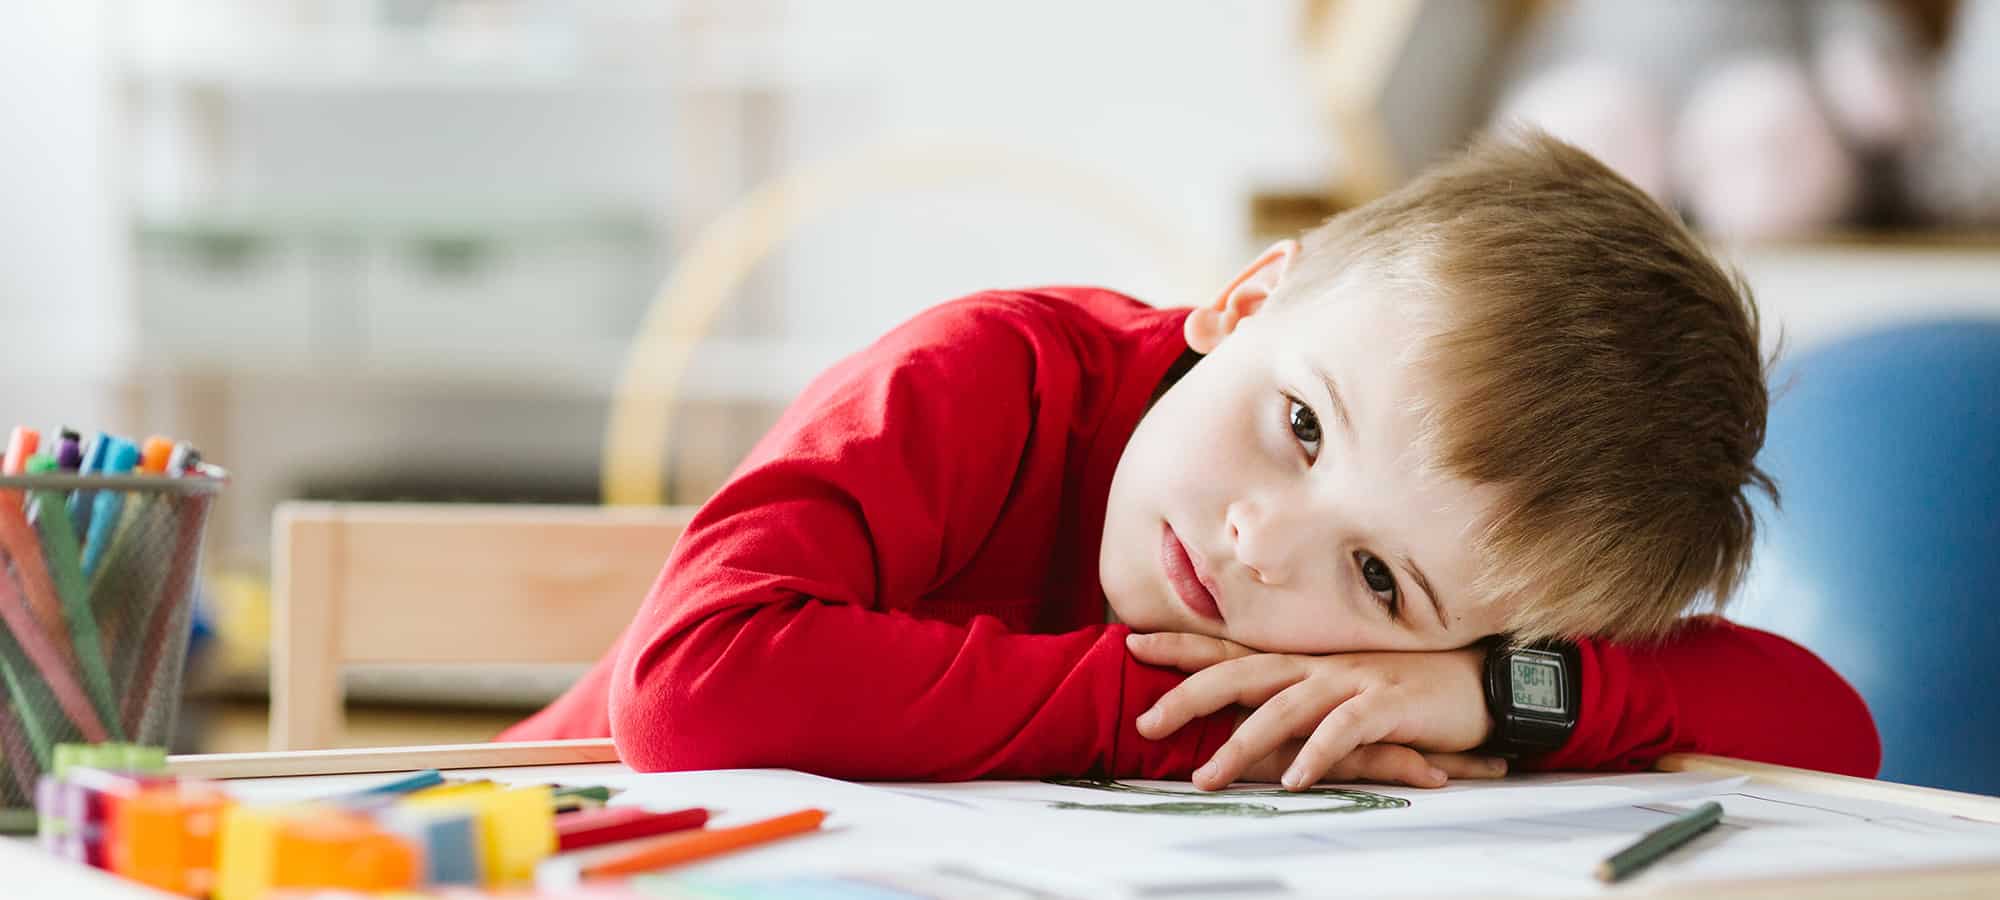 Signs your child could have ADHD